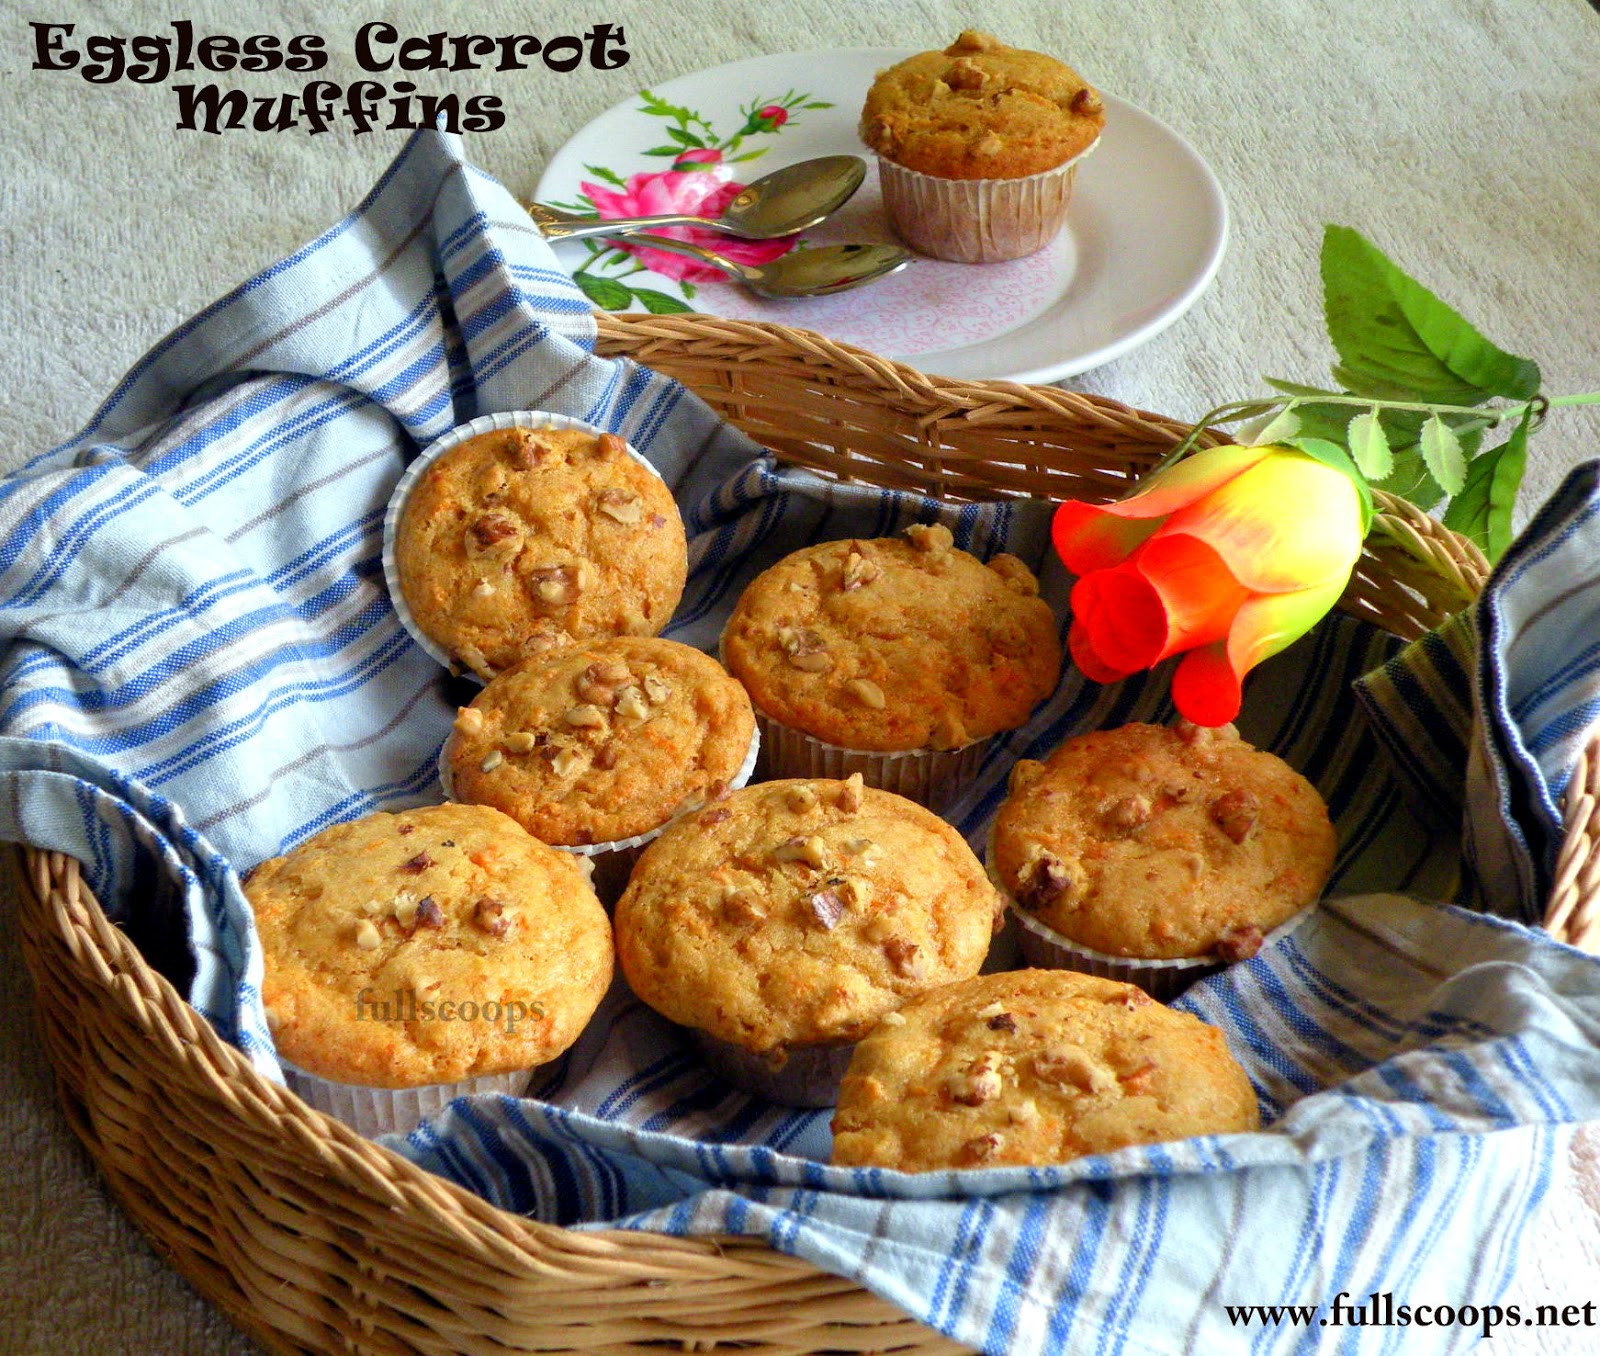 Eggless Carrot Muffins